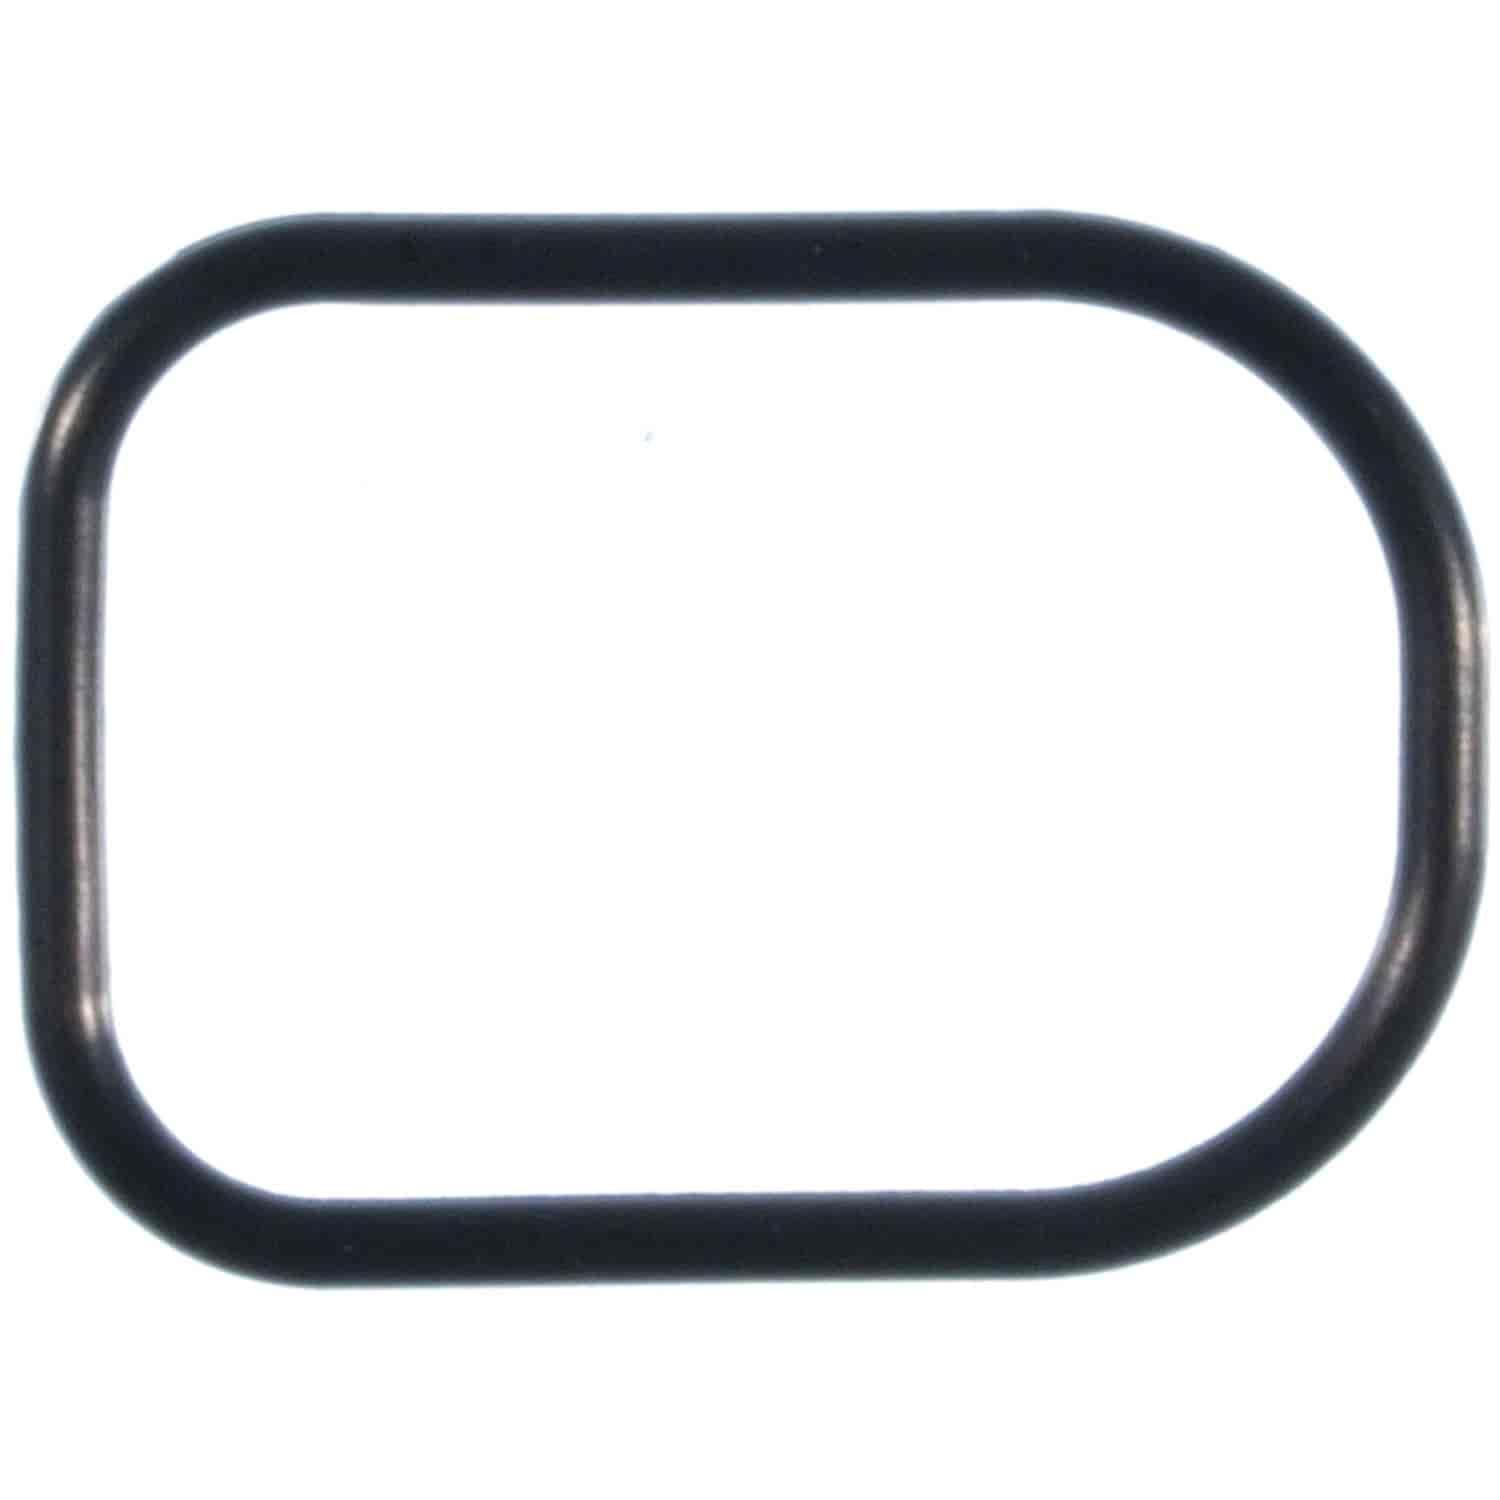 Water Outlet Gasket Mazda 2006-2010 2.0L 2000CC MX-5